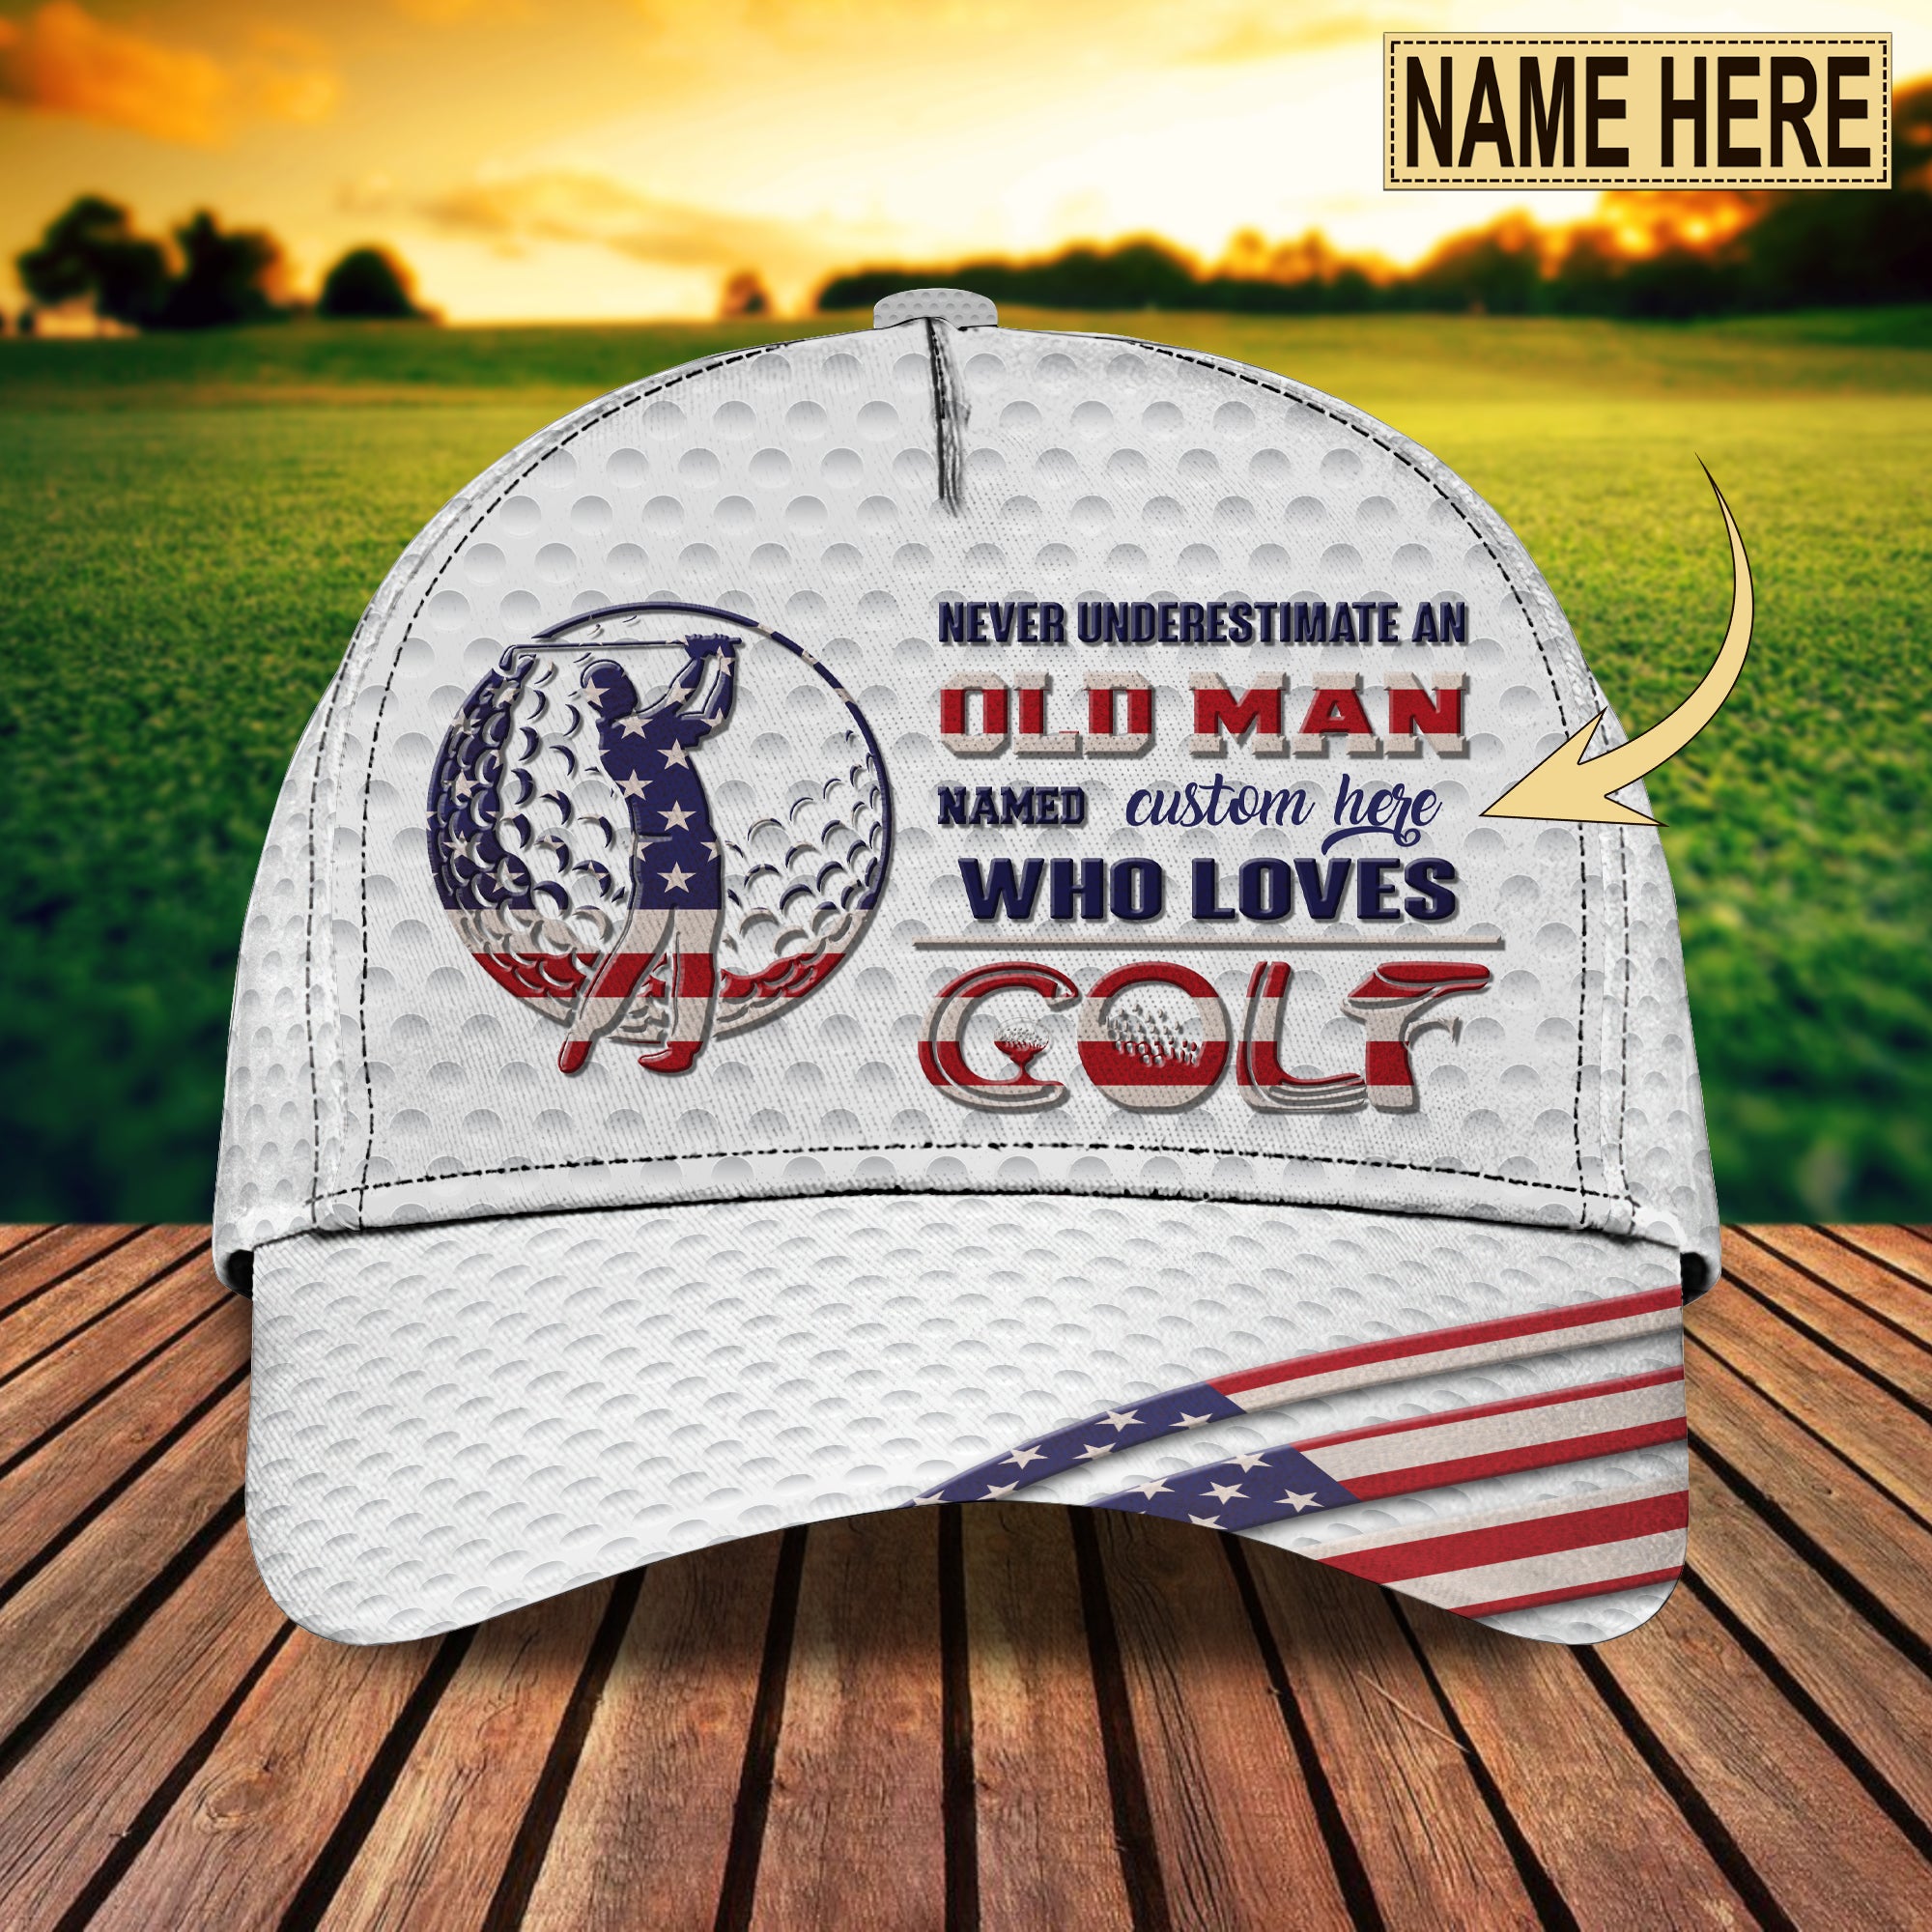 Golf - Personalized Name Cap - Nmd 13